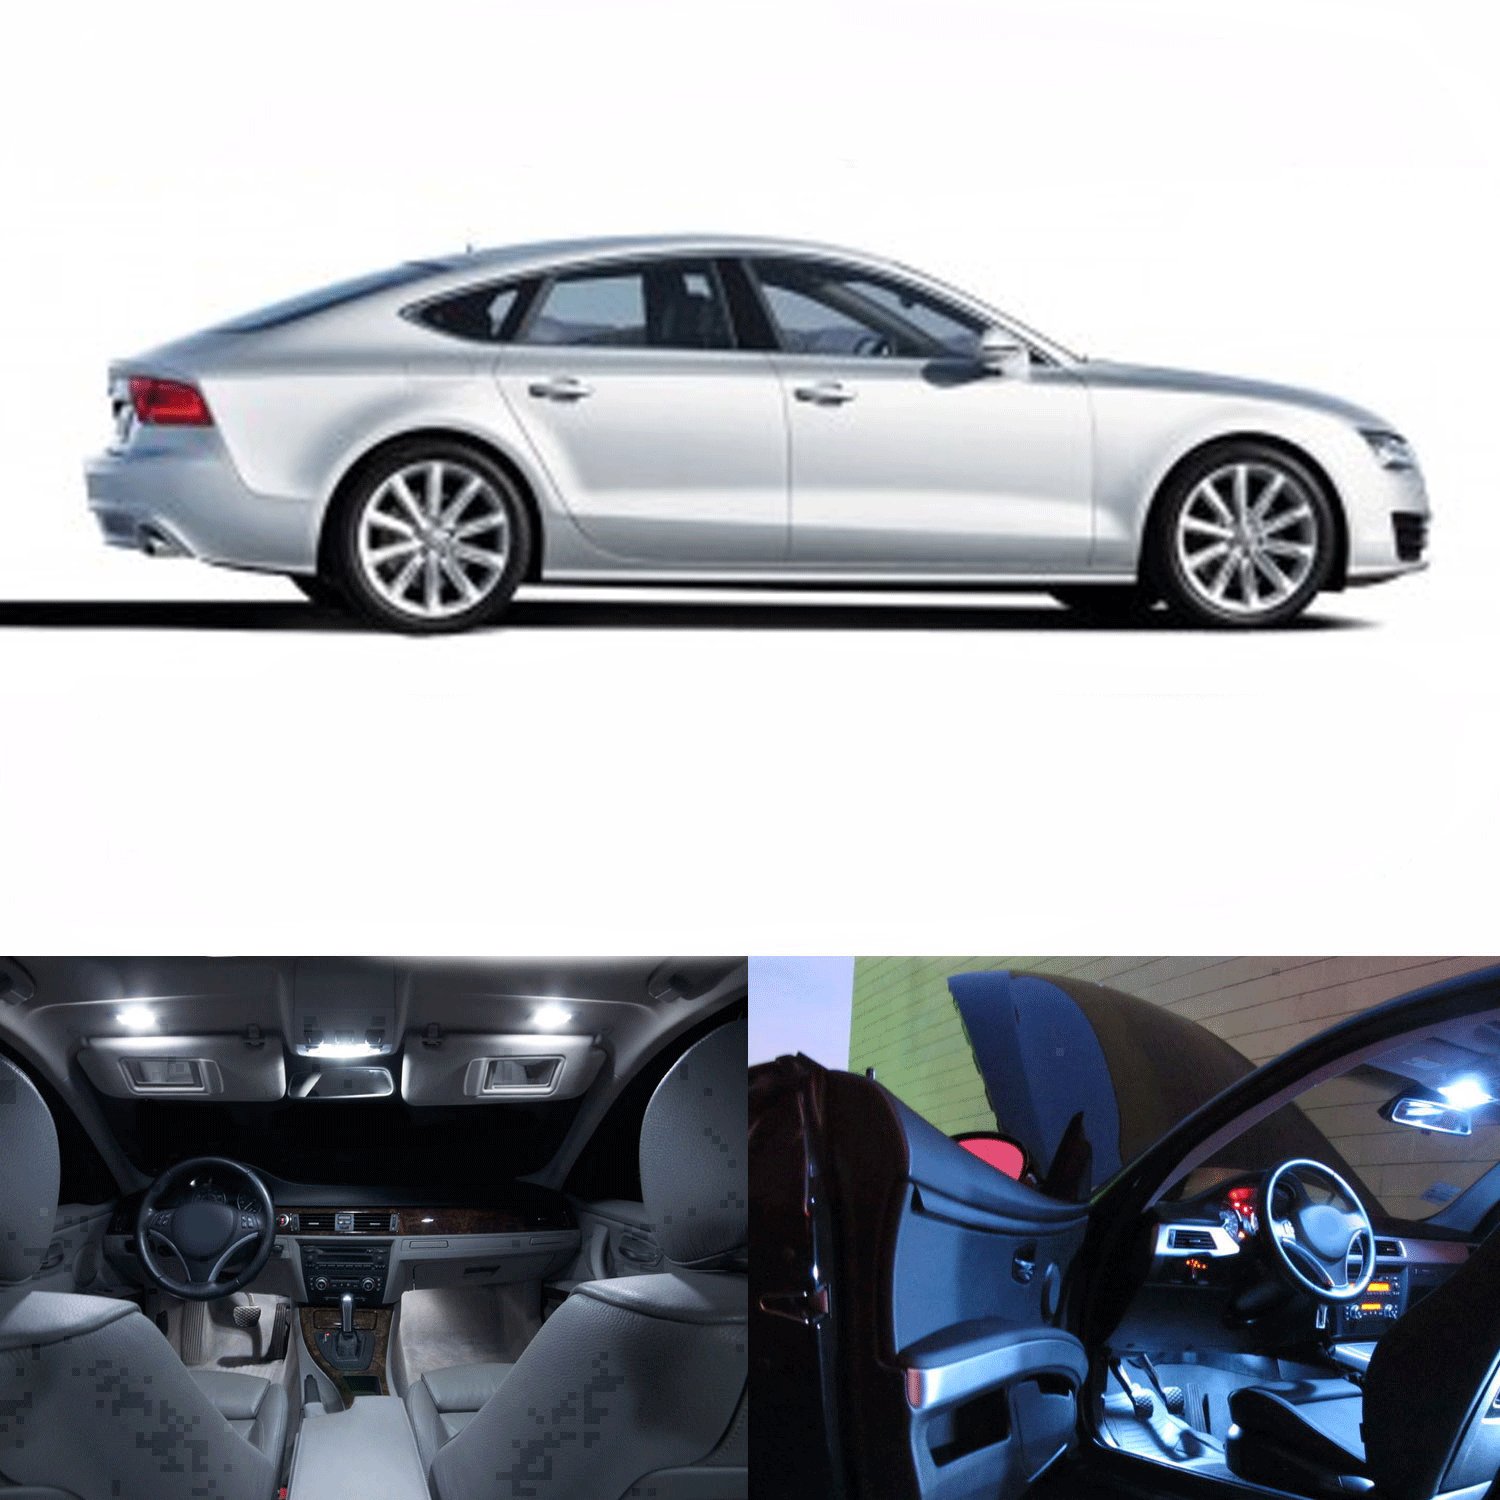 Amazon.com: LED White Lights Interior Package Kit for Audi A7 2010-2014 :  Automotive